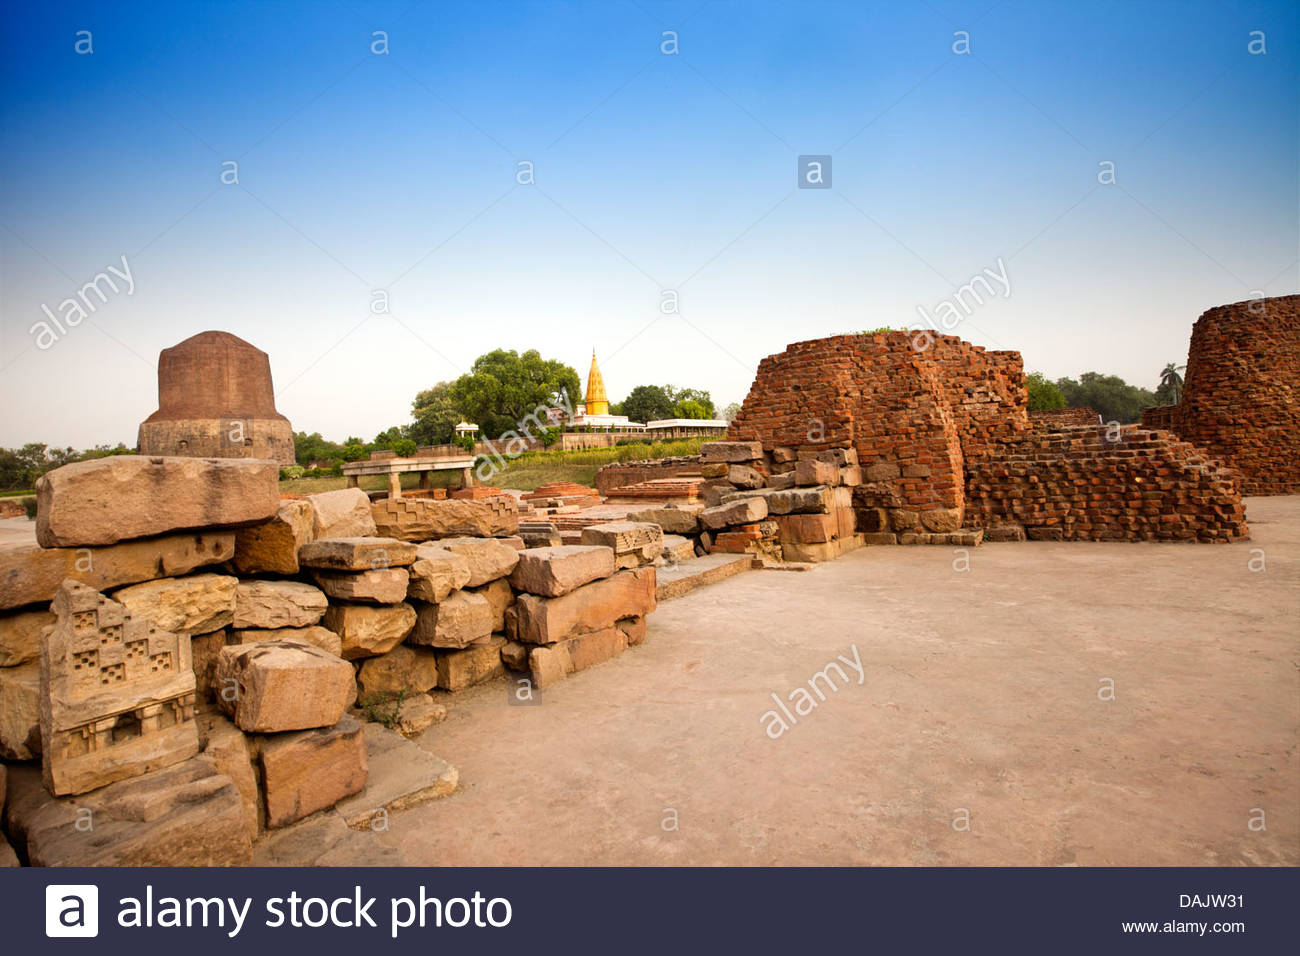 Ruins At Archaeological Site With Dhamek Stupa In The Background